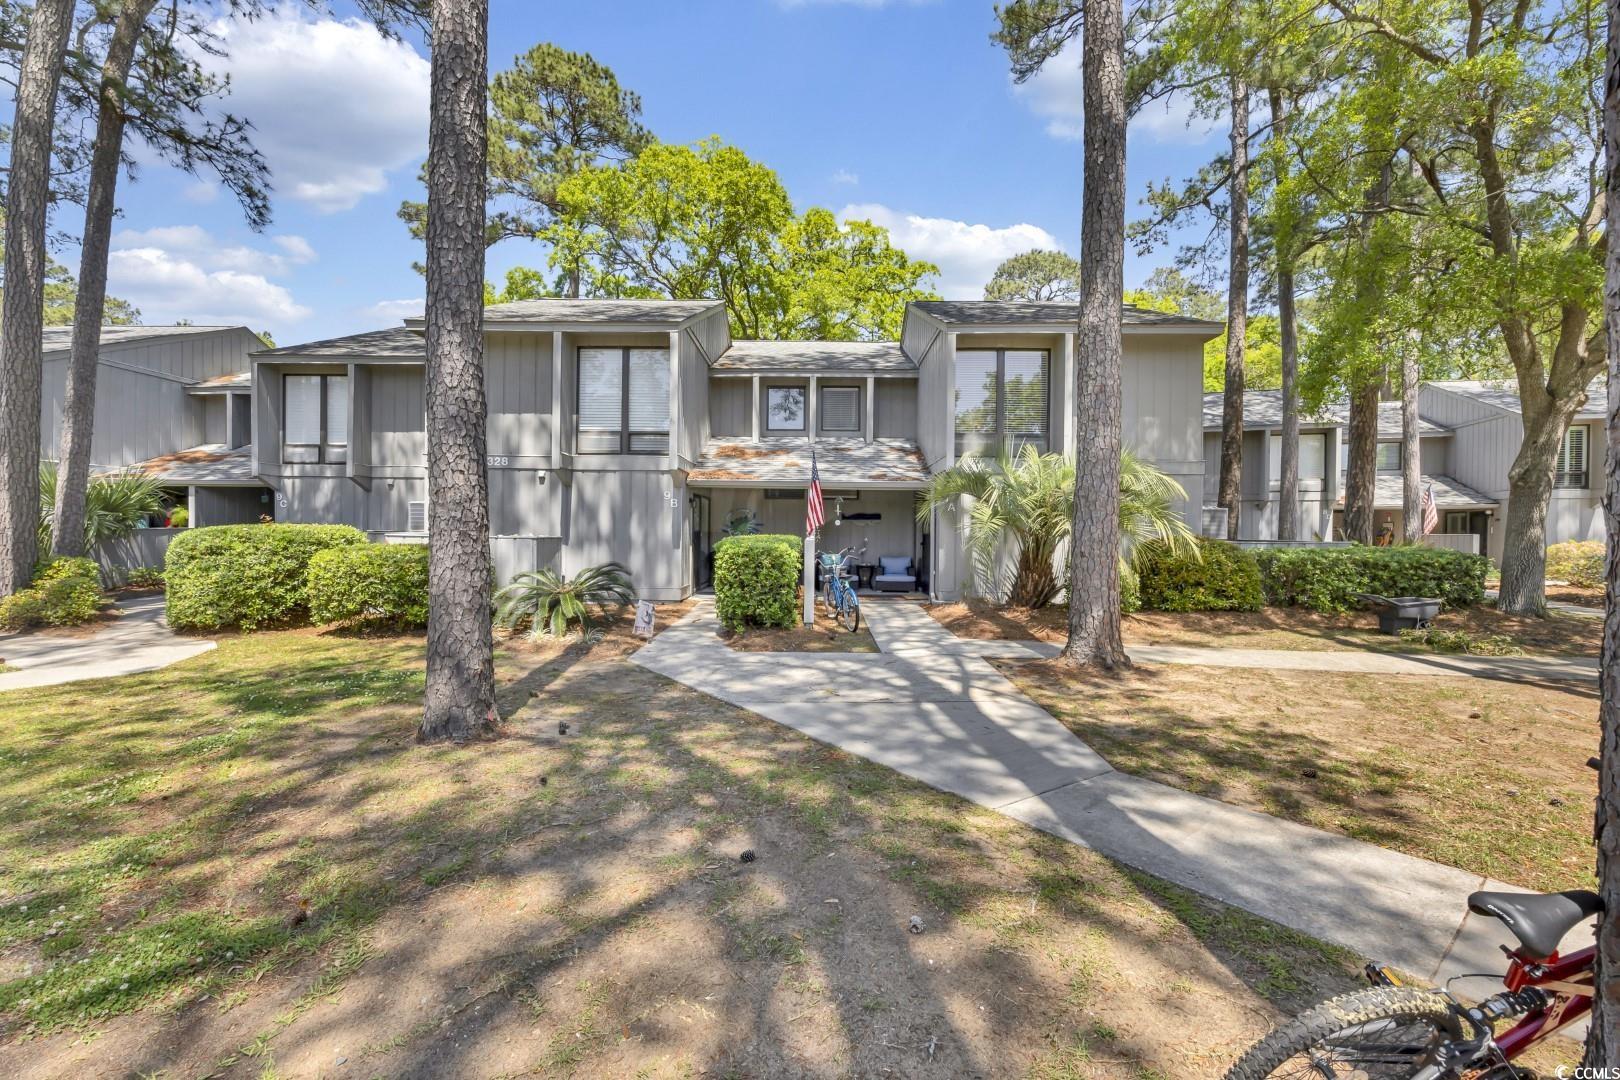 this newly listed home in a charming waterfront community east of 17 offers a delightful lifestyle. within walking distance to south litchfield beaches, dining, shopping, and recreational facilities including pickleball courts and a ymca, convenience is paramount. surrounded by ancient oak trees, the home boasts stunning views through new energy-efficient pella sliders and windows. tucked into a corner, the end unit townhome provides privacy while being close to the community pool and playground. fresh paint throughout creates a warm ambiance, complementing the renovated kitchen with granite countertops, stainless-steel appliances, and shaker style slow-close cabinets. a renovated bathroom on the main level adds convenience and style, while new carpeting upstairs enhances comfort. three spacious bedrooms and two baths upstairs offer ample space. new essentials like a hot water heater, hvac system, wyze security, and wi-fi smart thermostat, peace of mind is ensured. the community features a large swimming pool, community dock, boat storage, and clubhouse, with the hoa fee covering various services including cable/wifi, water, sewer, trash pick-up, pest control, lawn care, and exterior maintenance. move-in ready and attractively priced, this home promises a worry-free lifestyle in a beautiful location!